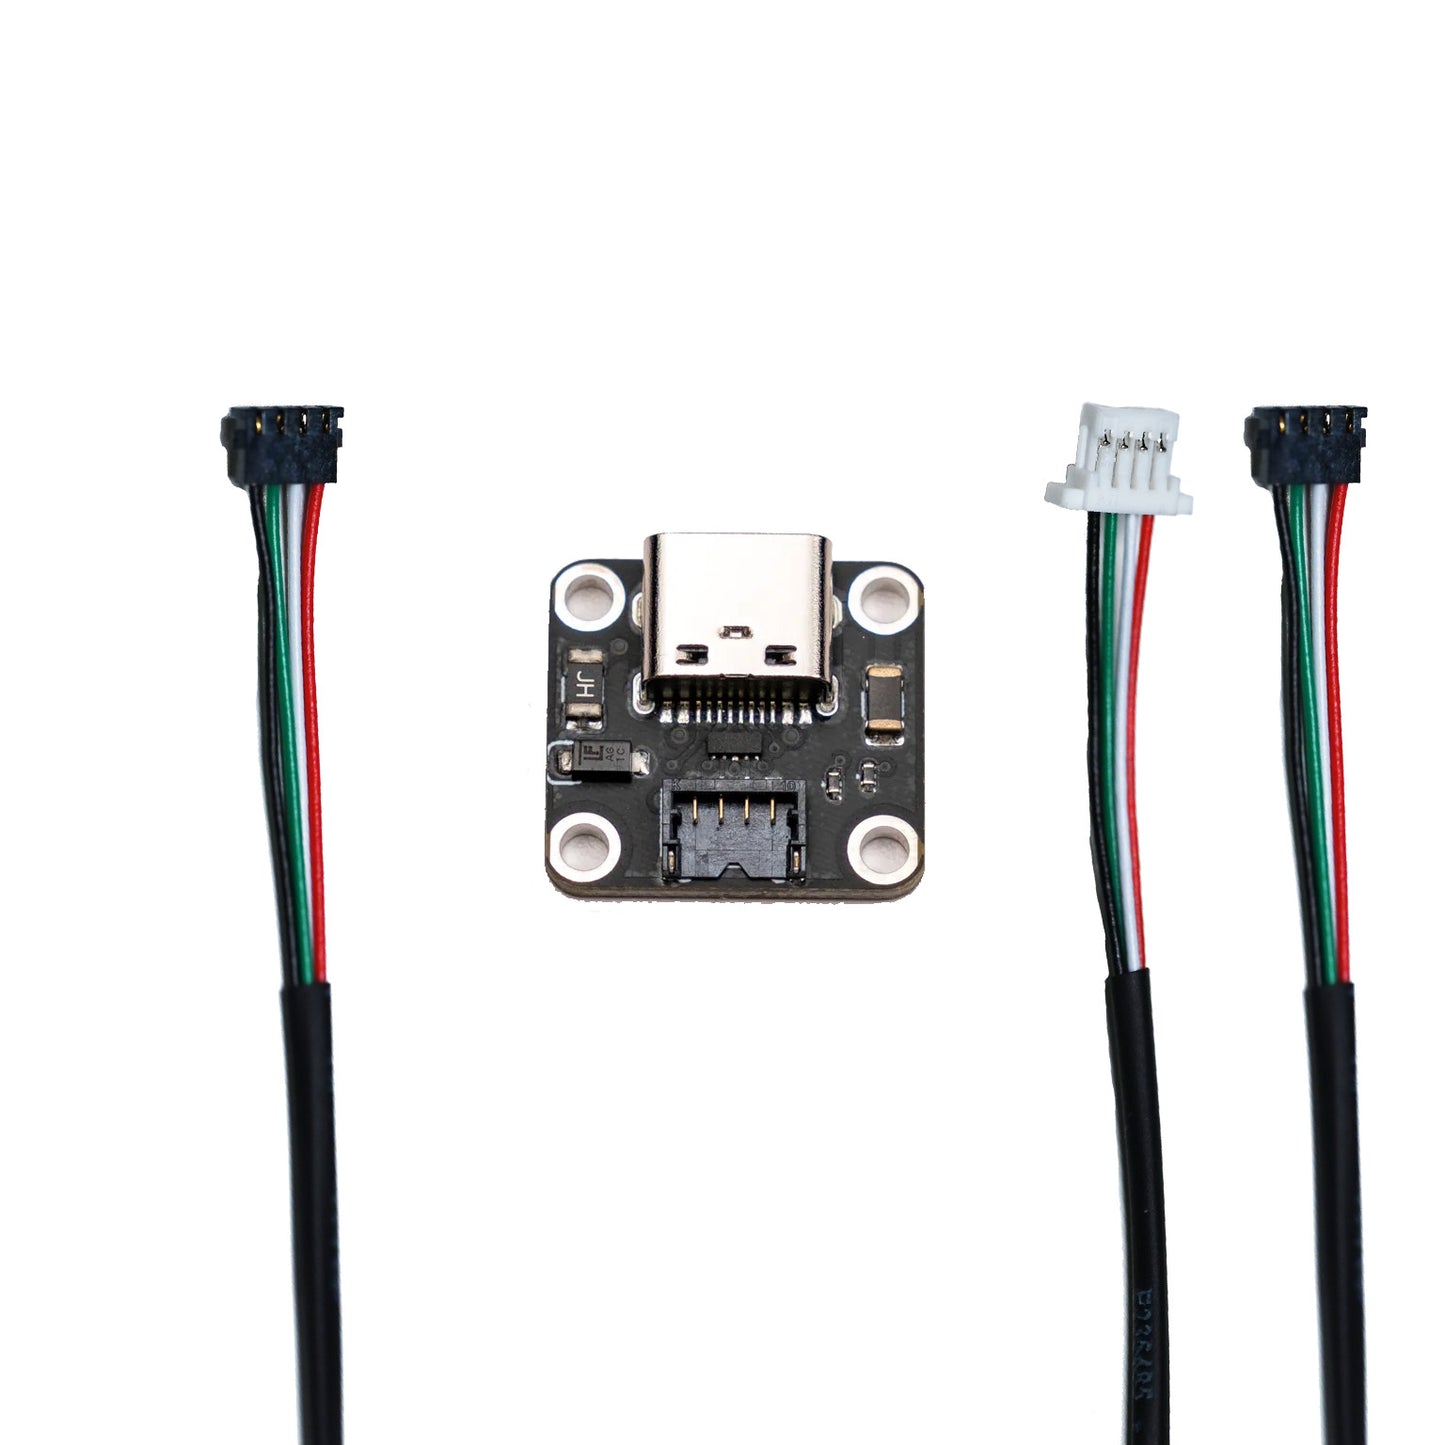 Unified C4 Daughterboard and Molex Pico-EZmate Cable